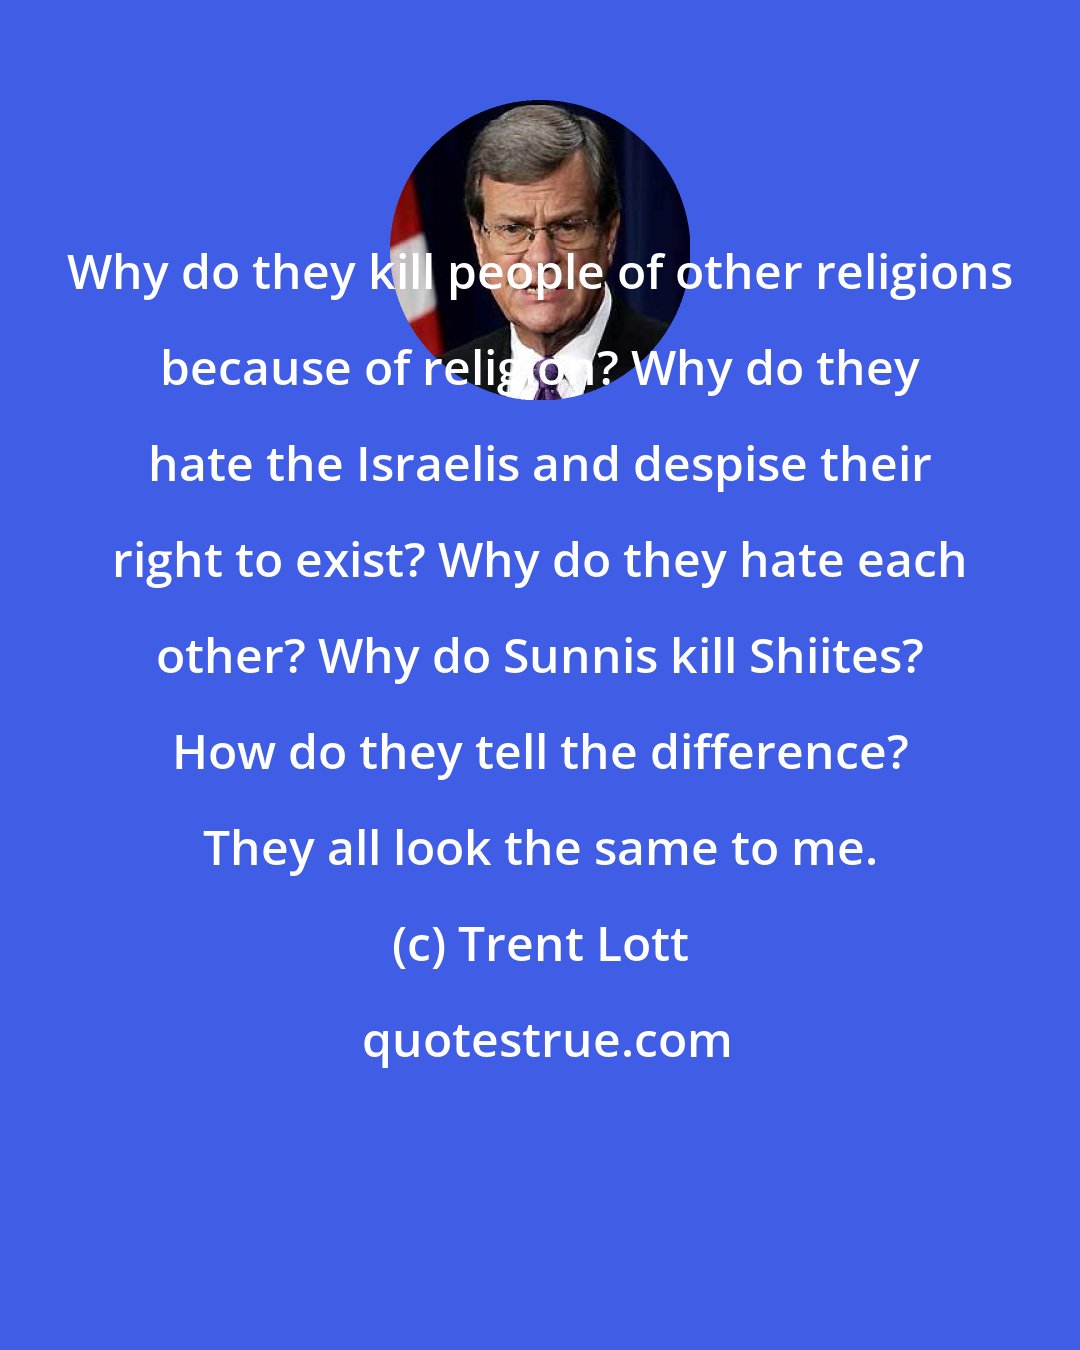 Trent Lott: Why do they kill people of other religions because of religion? Why do they hate the Israelis and despise their right to exist? Why do they hate each other? Why do Sunnis kill Shiites? How do they tell the difference? They all look the same to me.